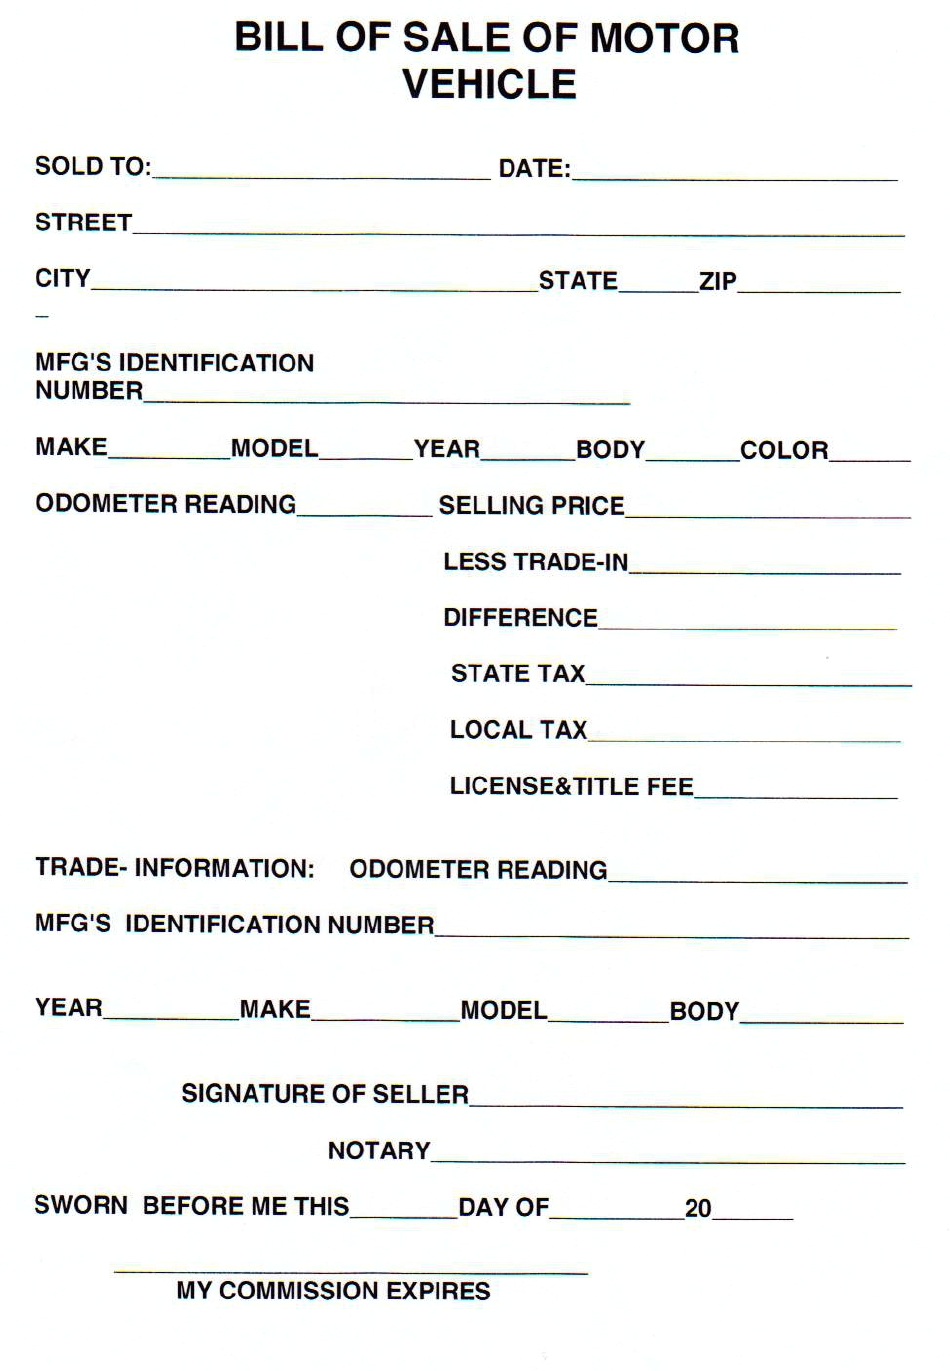 Bill of Sale of Motor Vehicle - Hancock County, Tennessee, Page 1